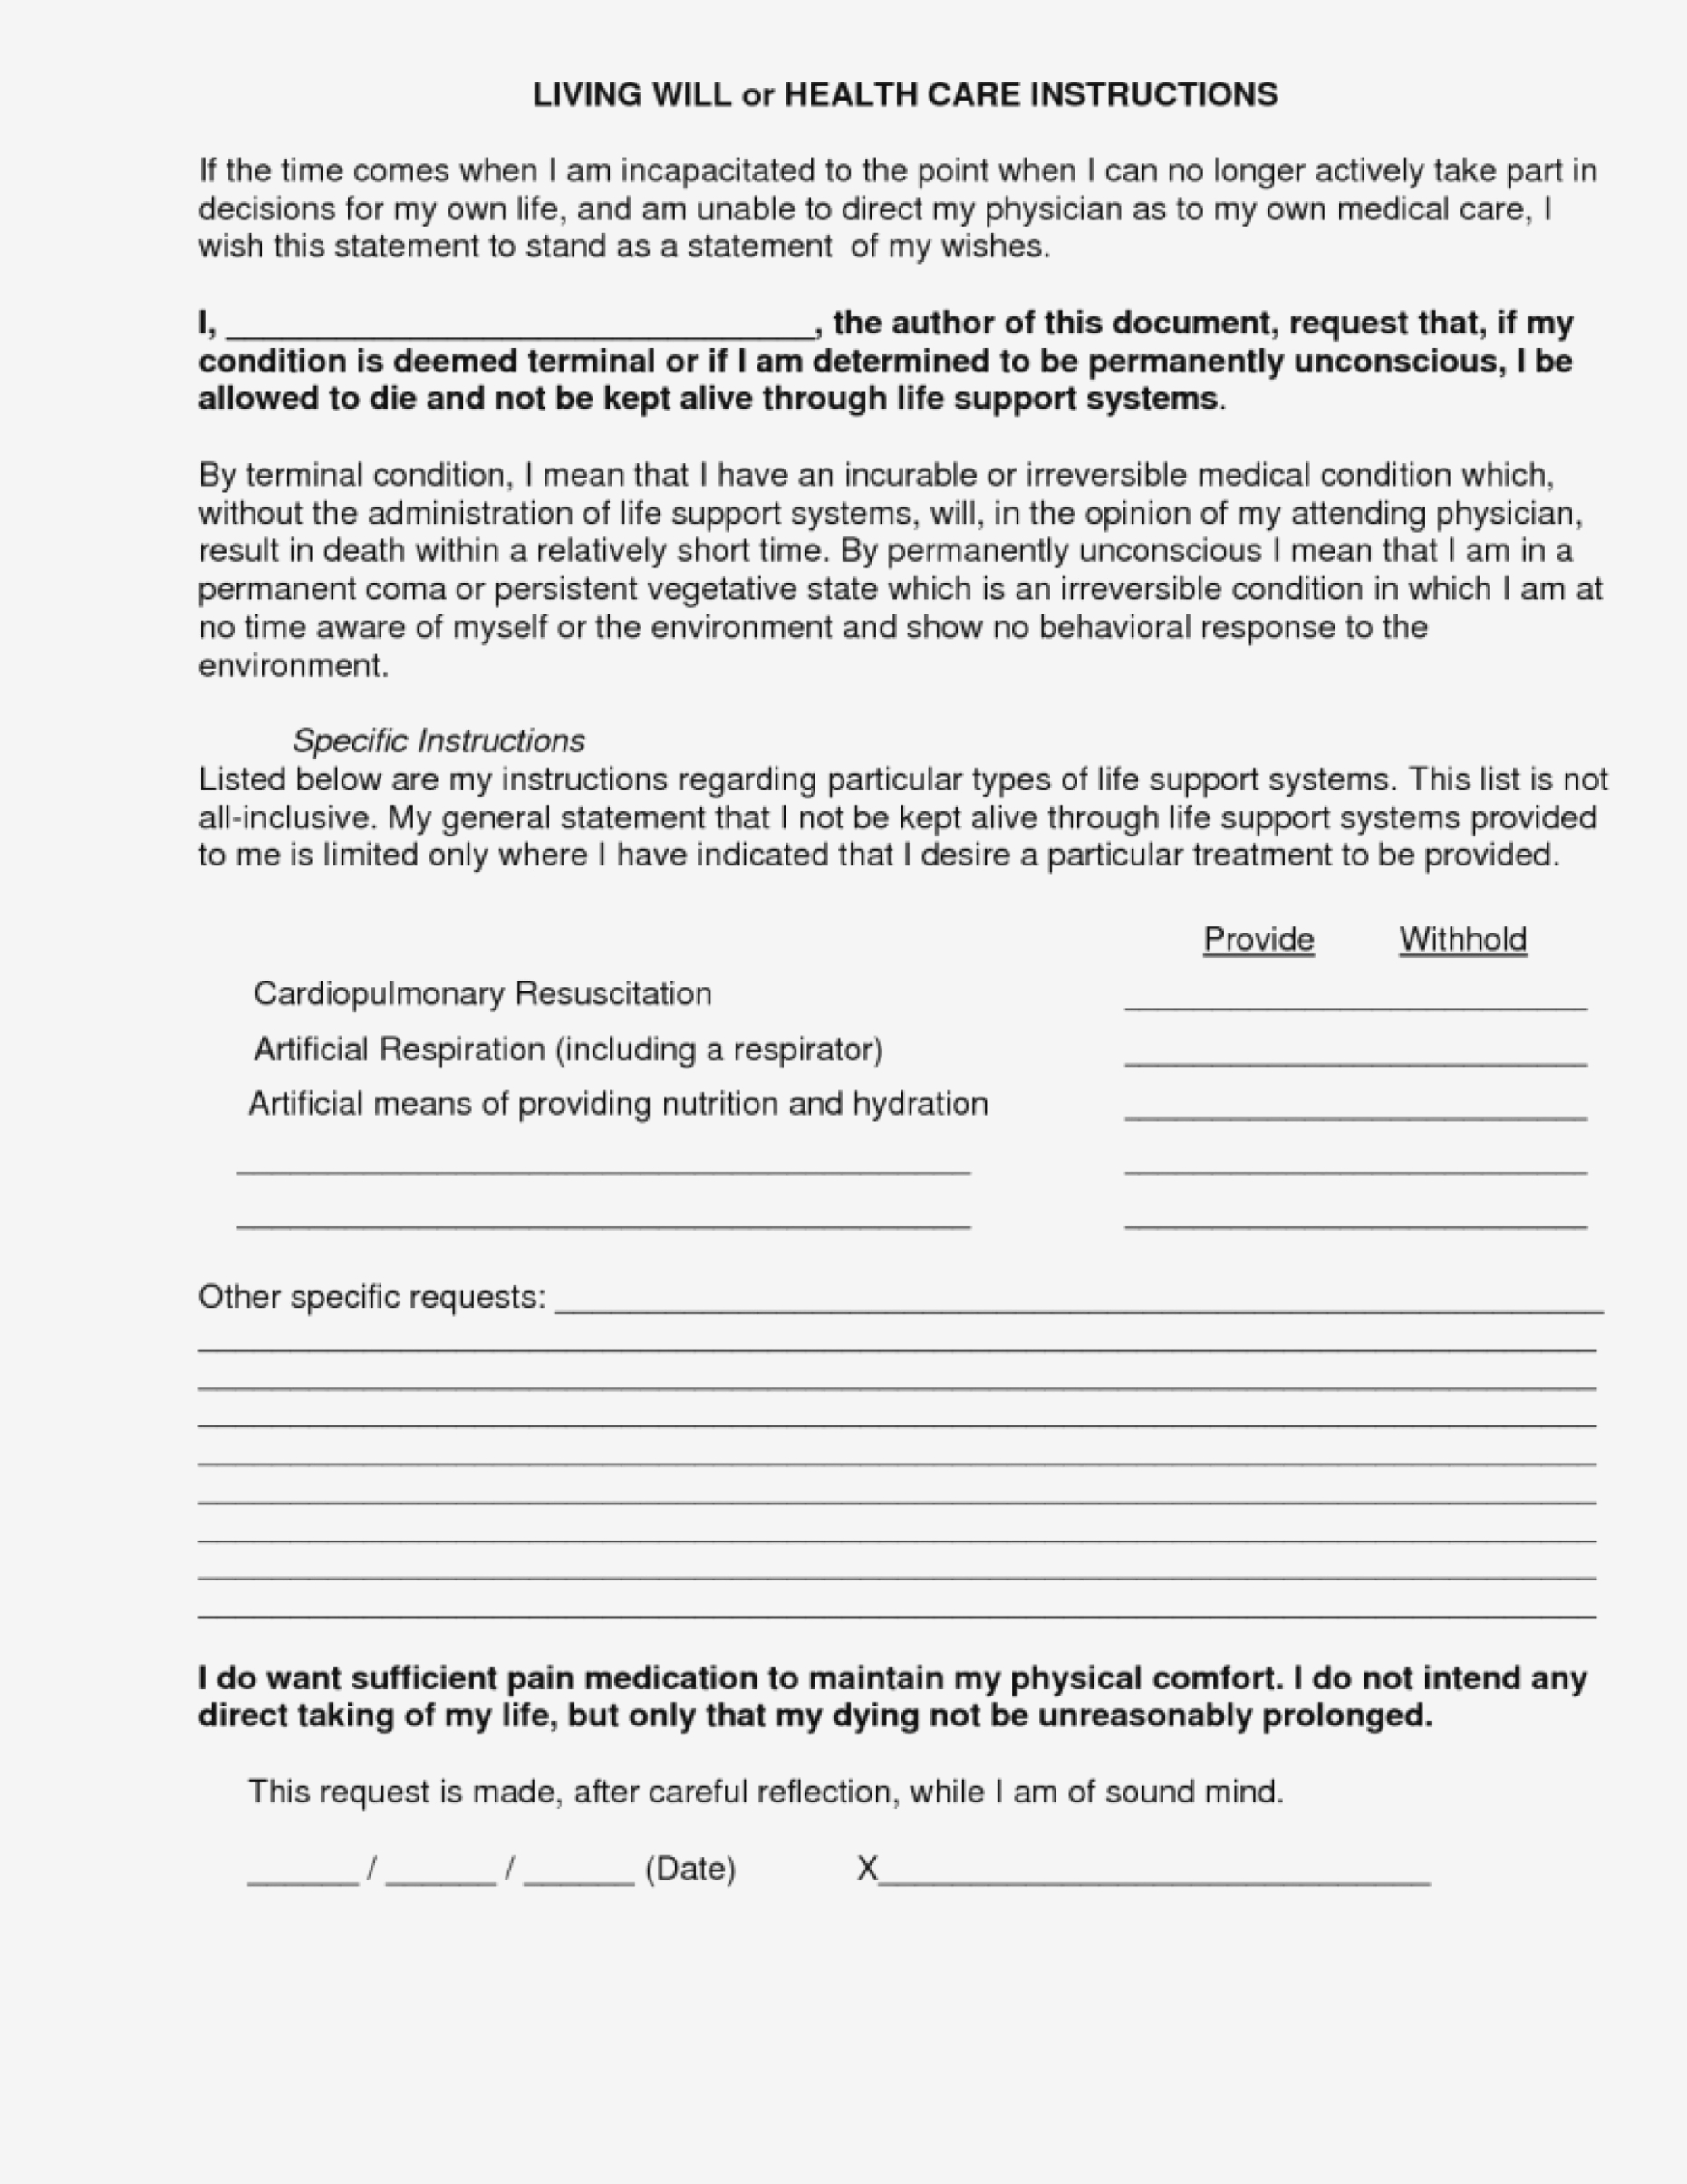 blank-living-will-forms-free-printable-from-legalzoom-living-will-forms-free-printable